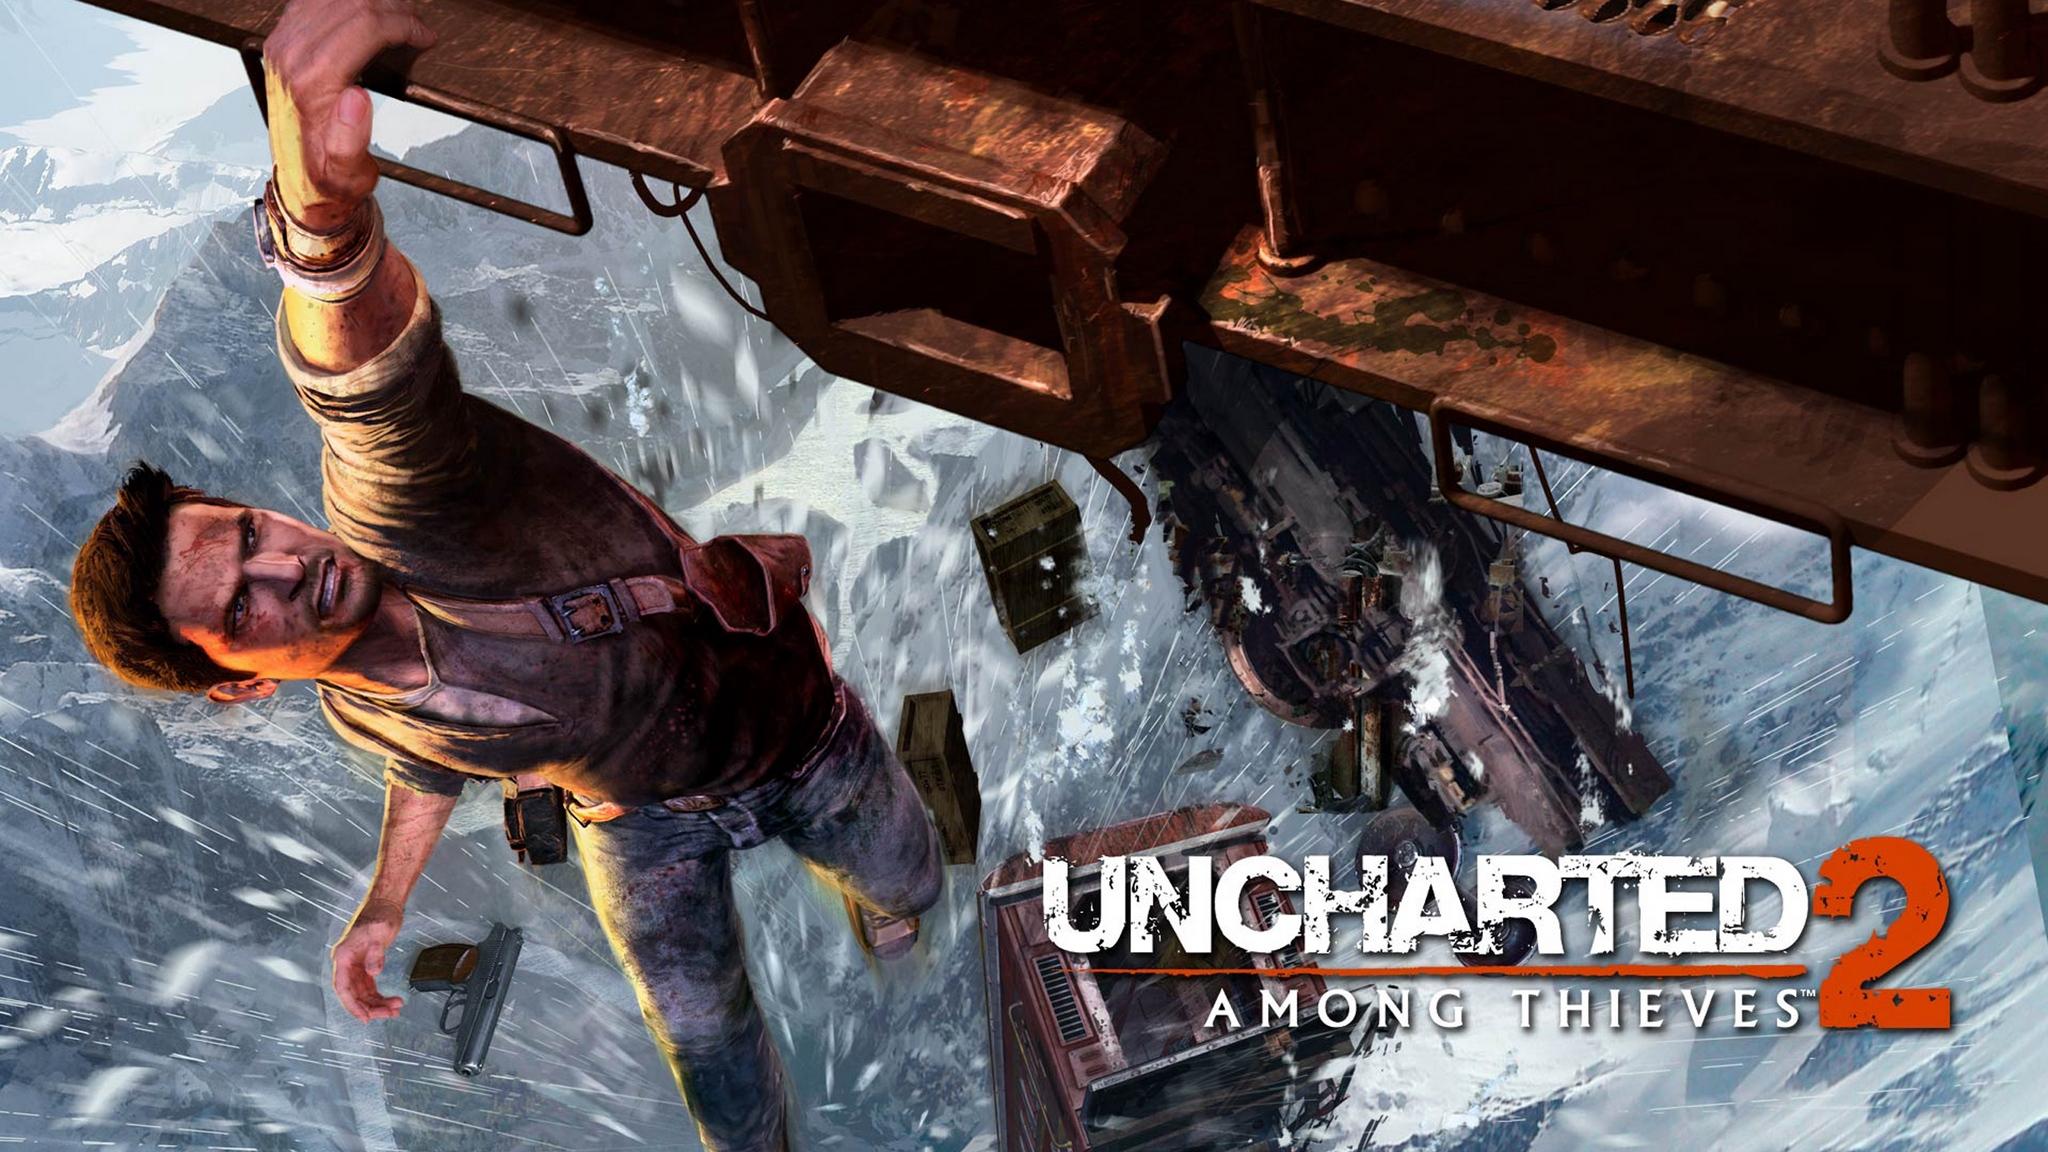 Download wallpaper 2048x1152 uncharted 2 among thieves